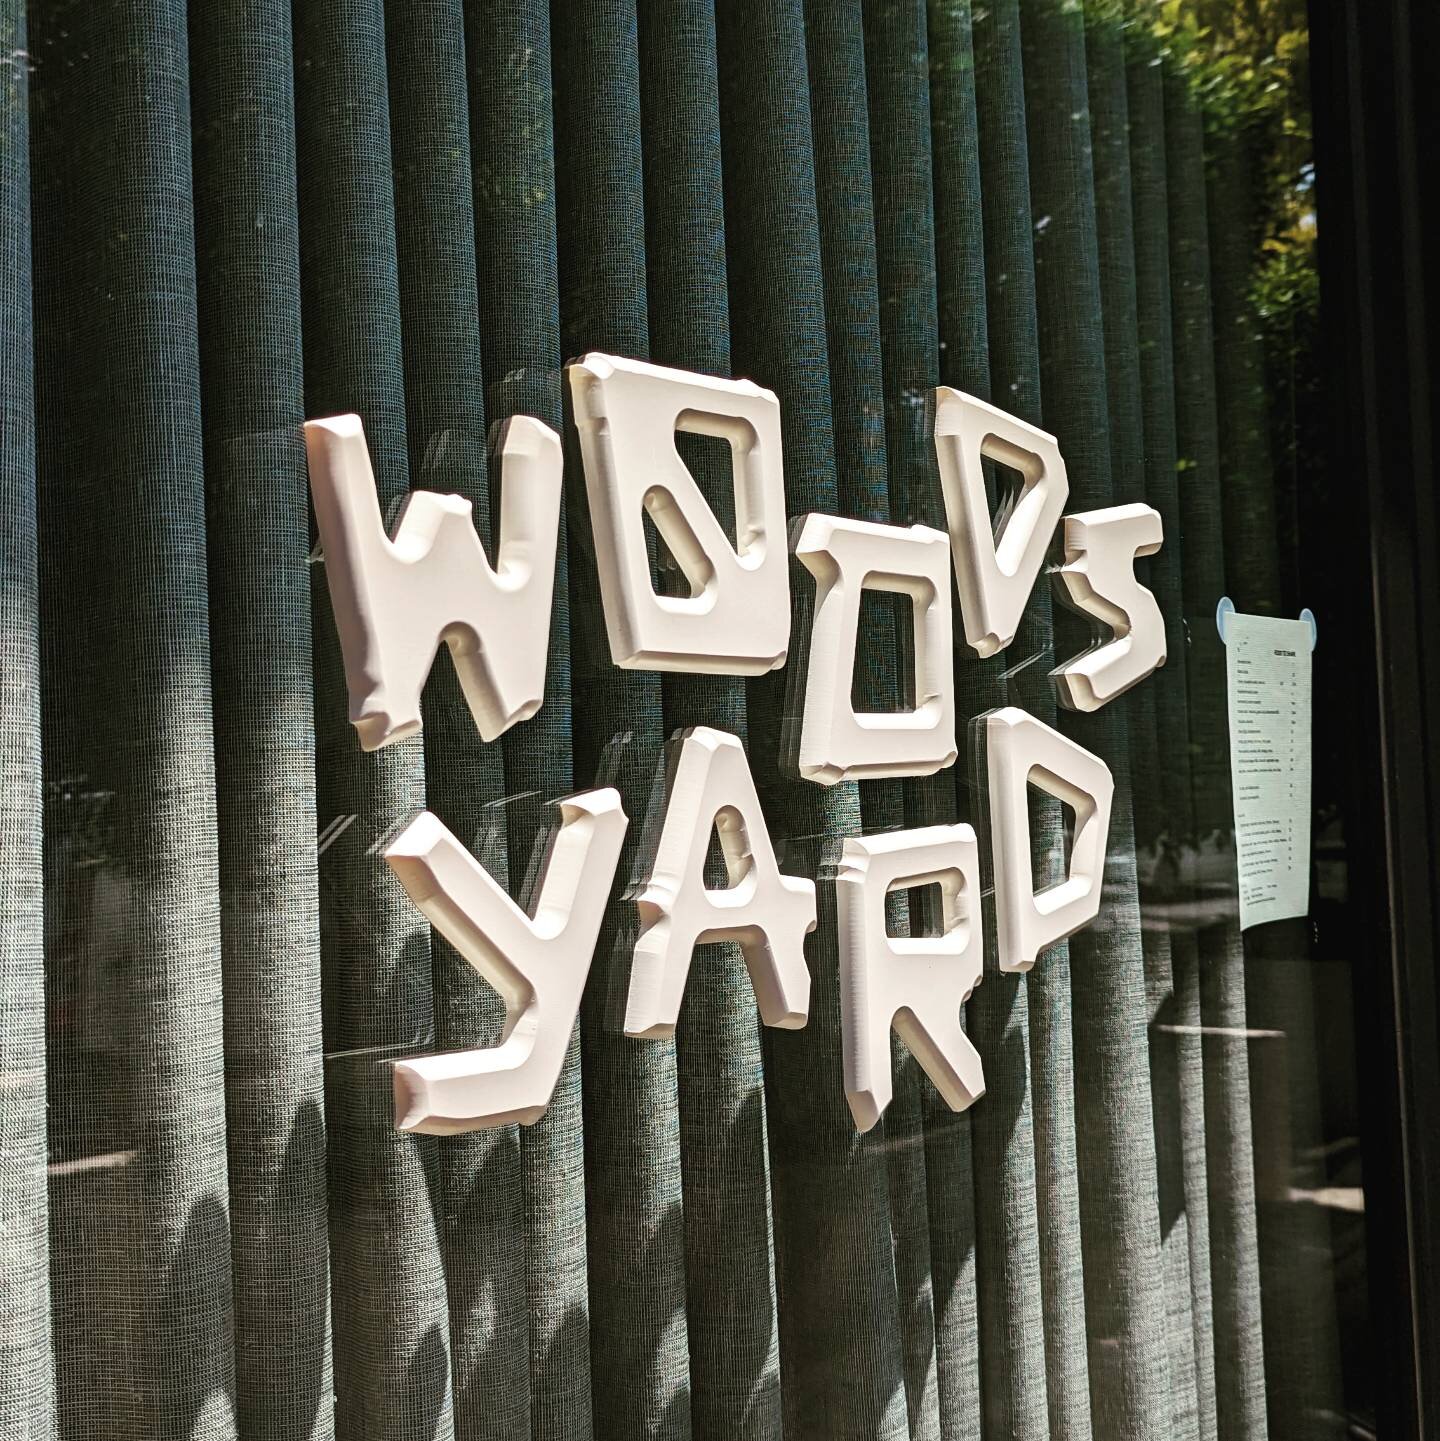 CNC cut raised letters for @woods_yard painted and installed on glass. 

Design by @swear_words 

#raisedletters #3dsigns #acrylic #acryliclettering #painted #shopsigns #hospitalitysignage #bar #winebar #restaurantsigns #branding #logo #melbourne #so